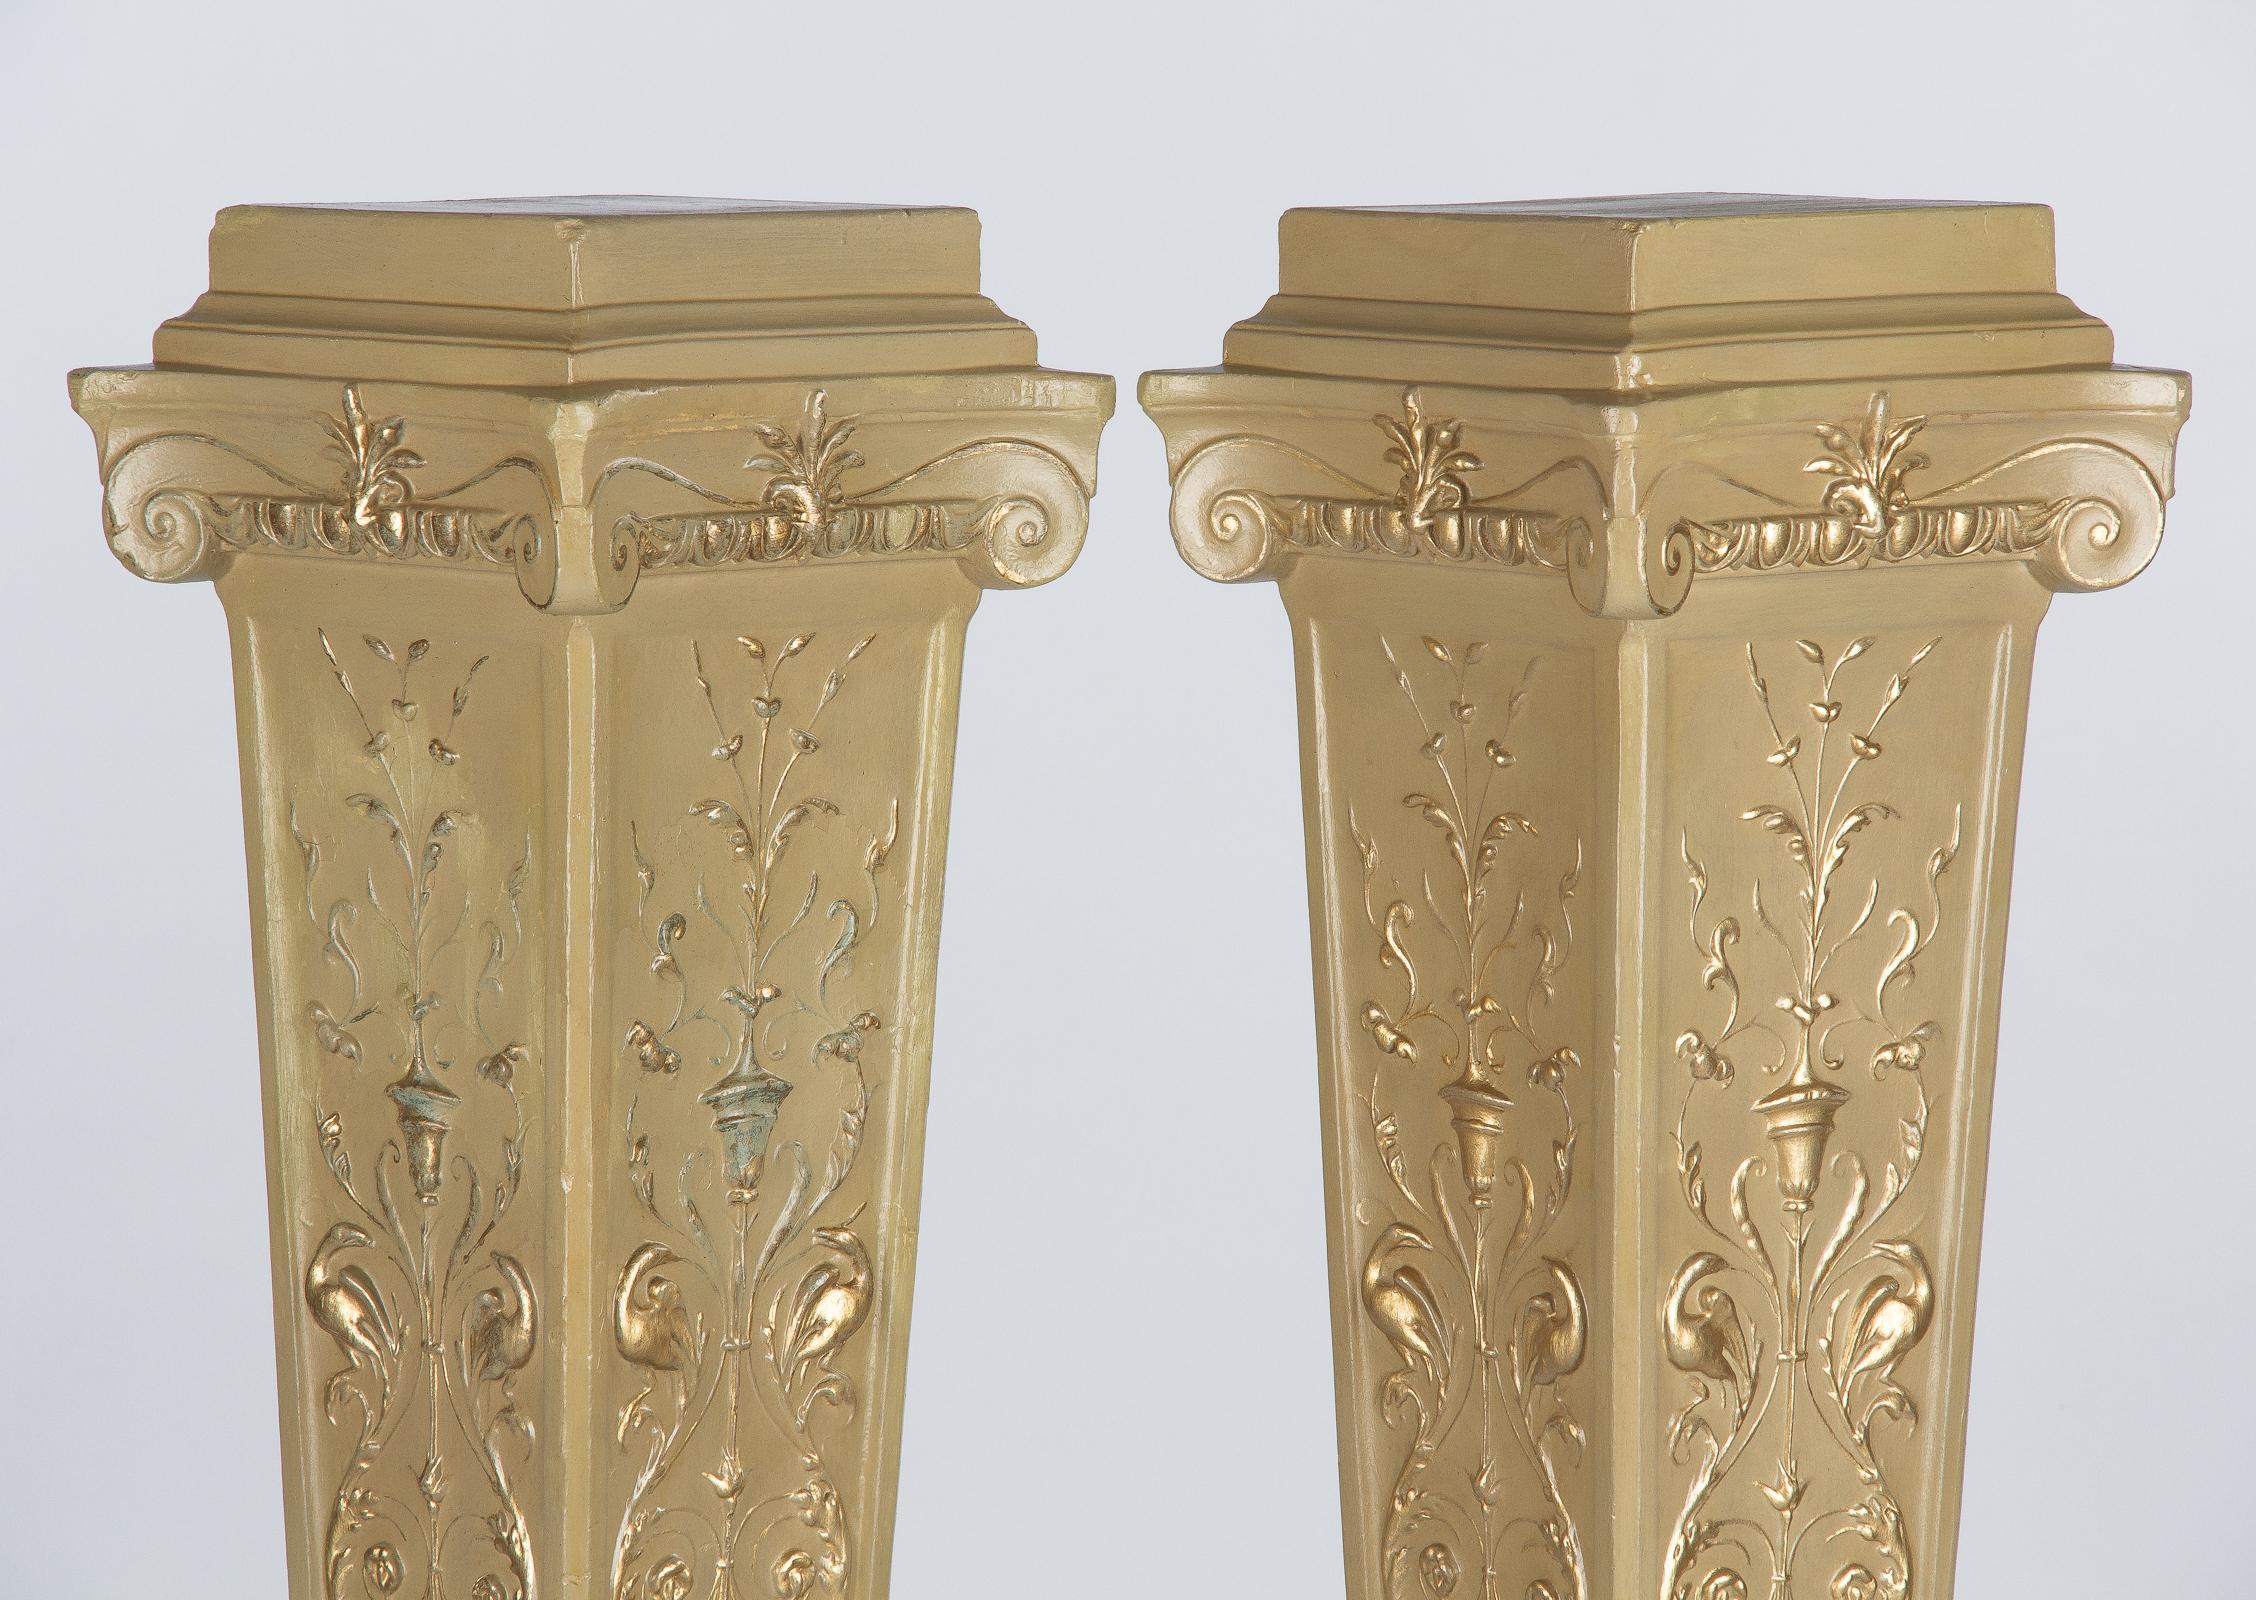 20th Century French Neoclassical Painted Plaster Pedestals, 1940s For Sale